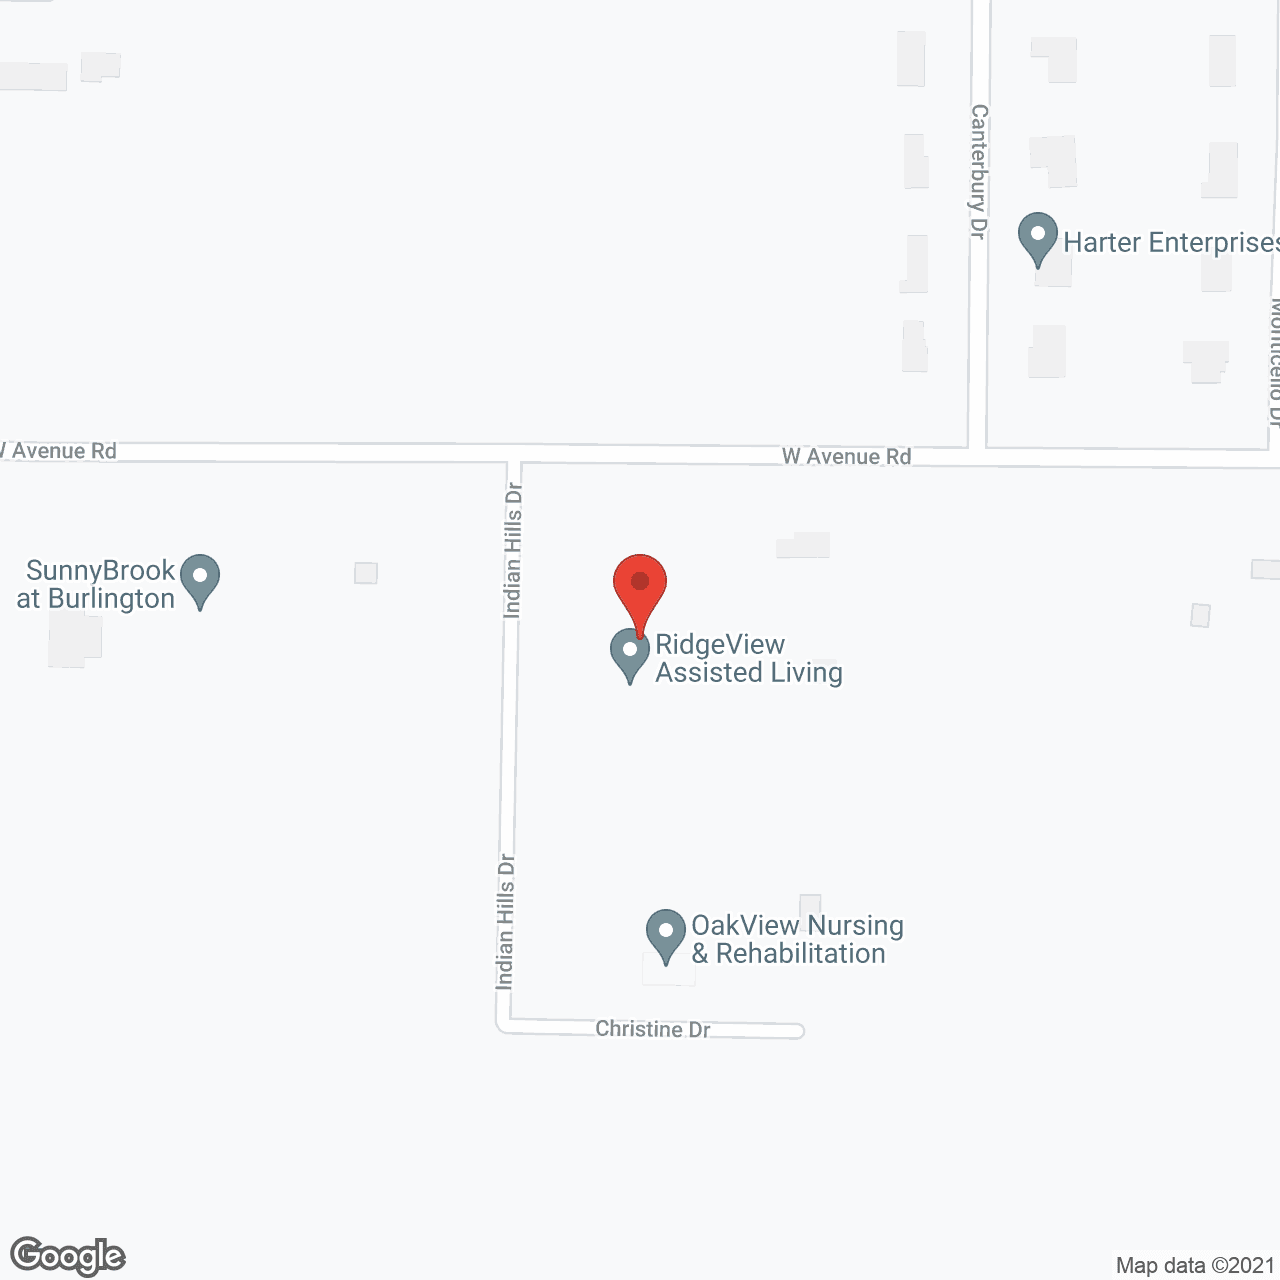 Ridgeview Assisted Living in google map